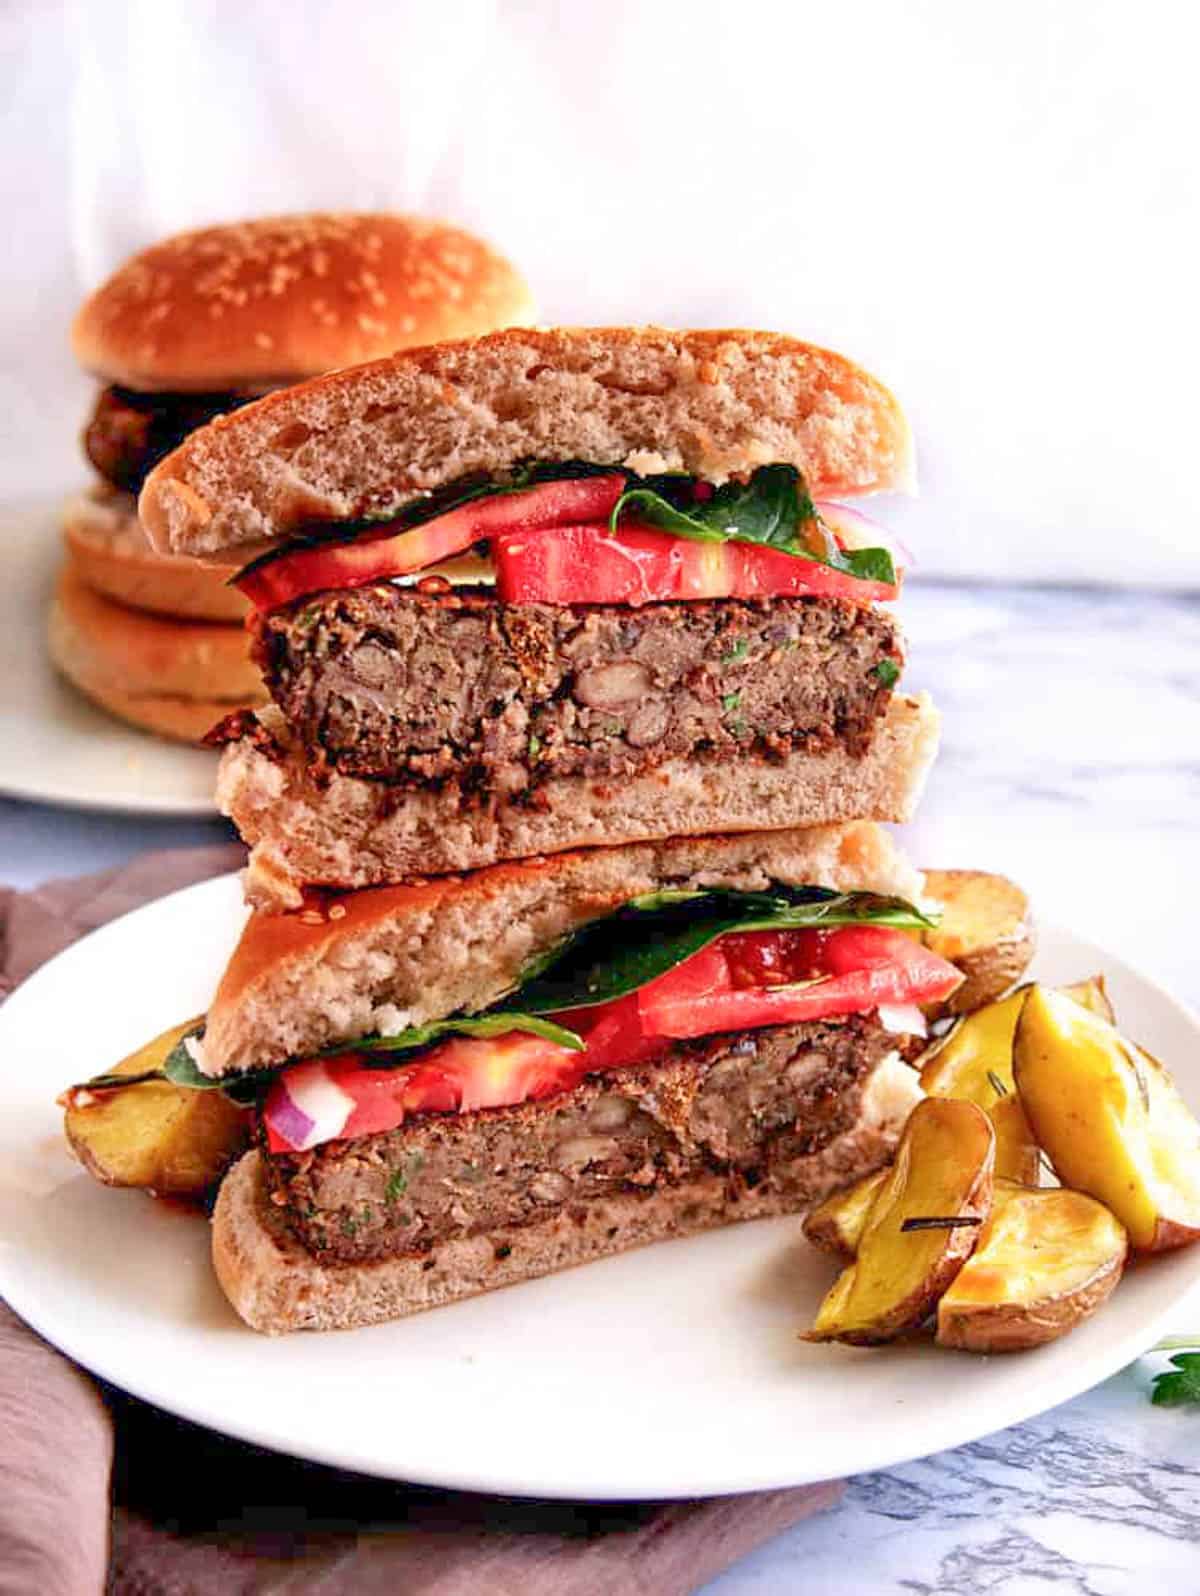 Black bean quinoa burgers cut in half, stacked on a white plate served with roasted potatoes on the side.